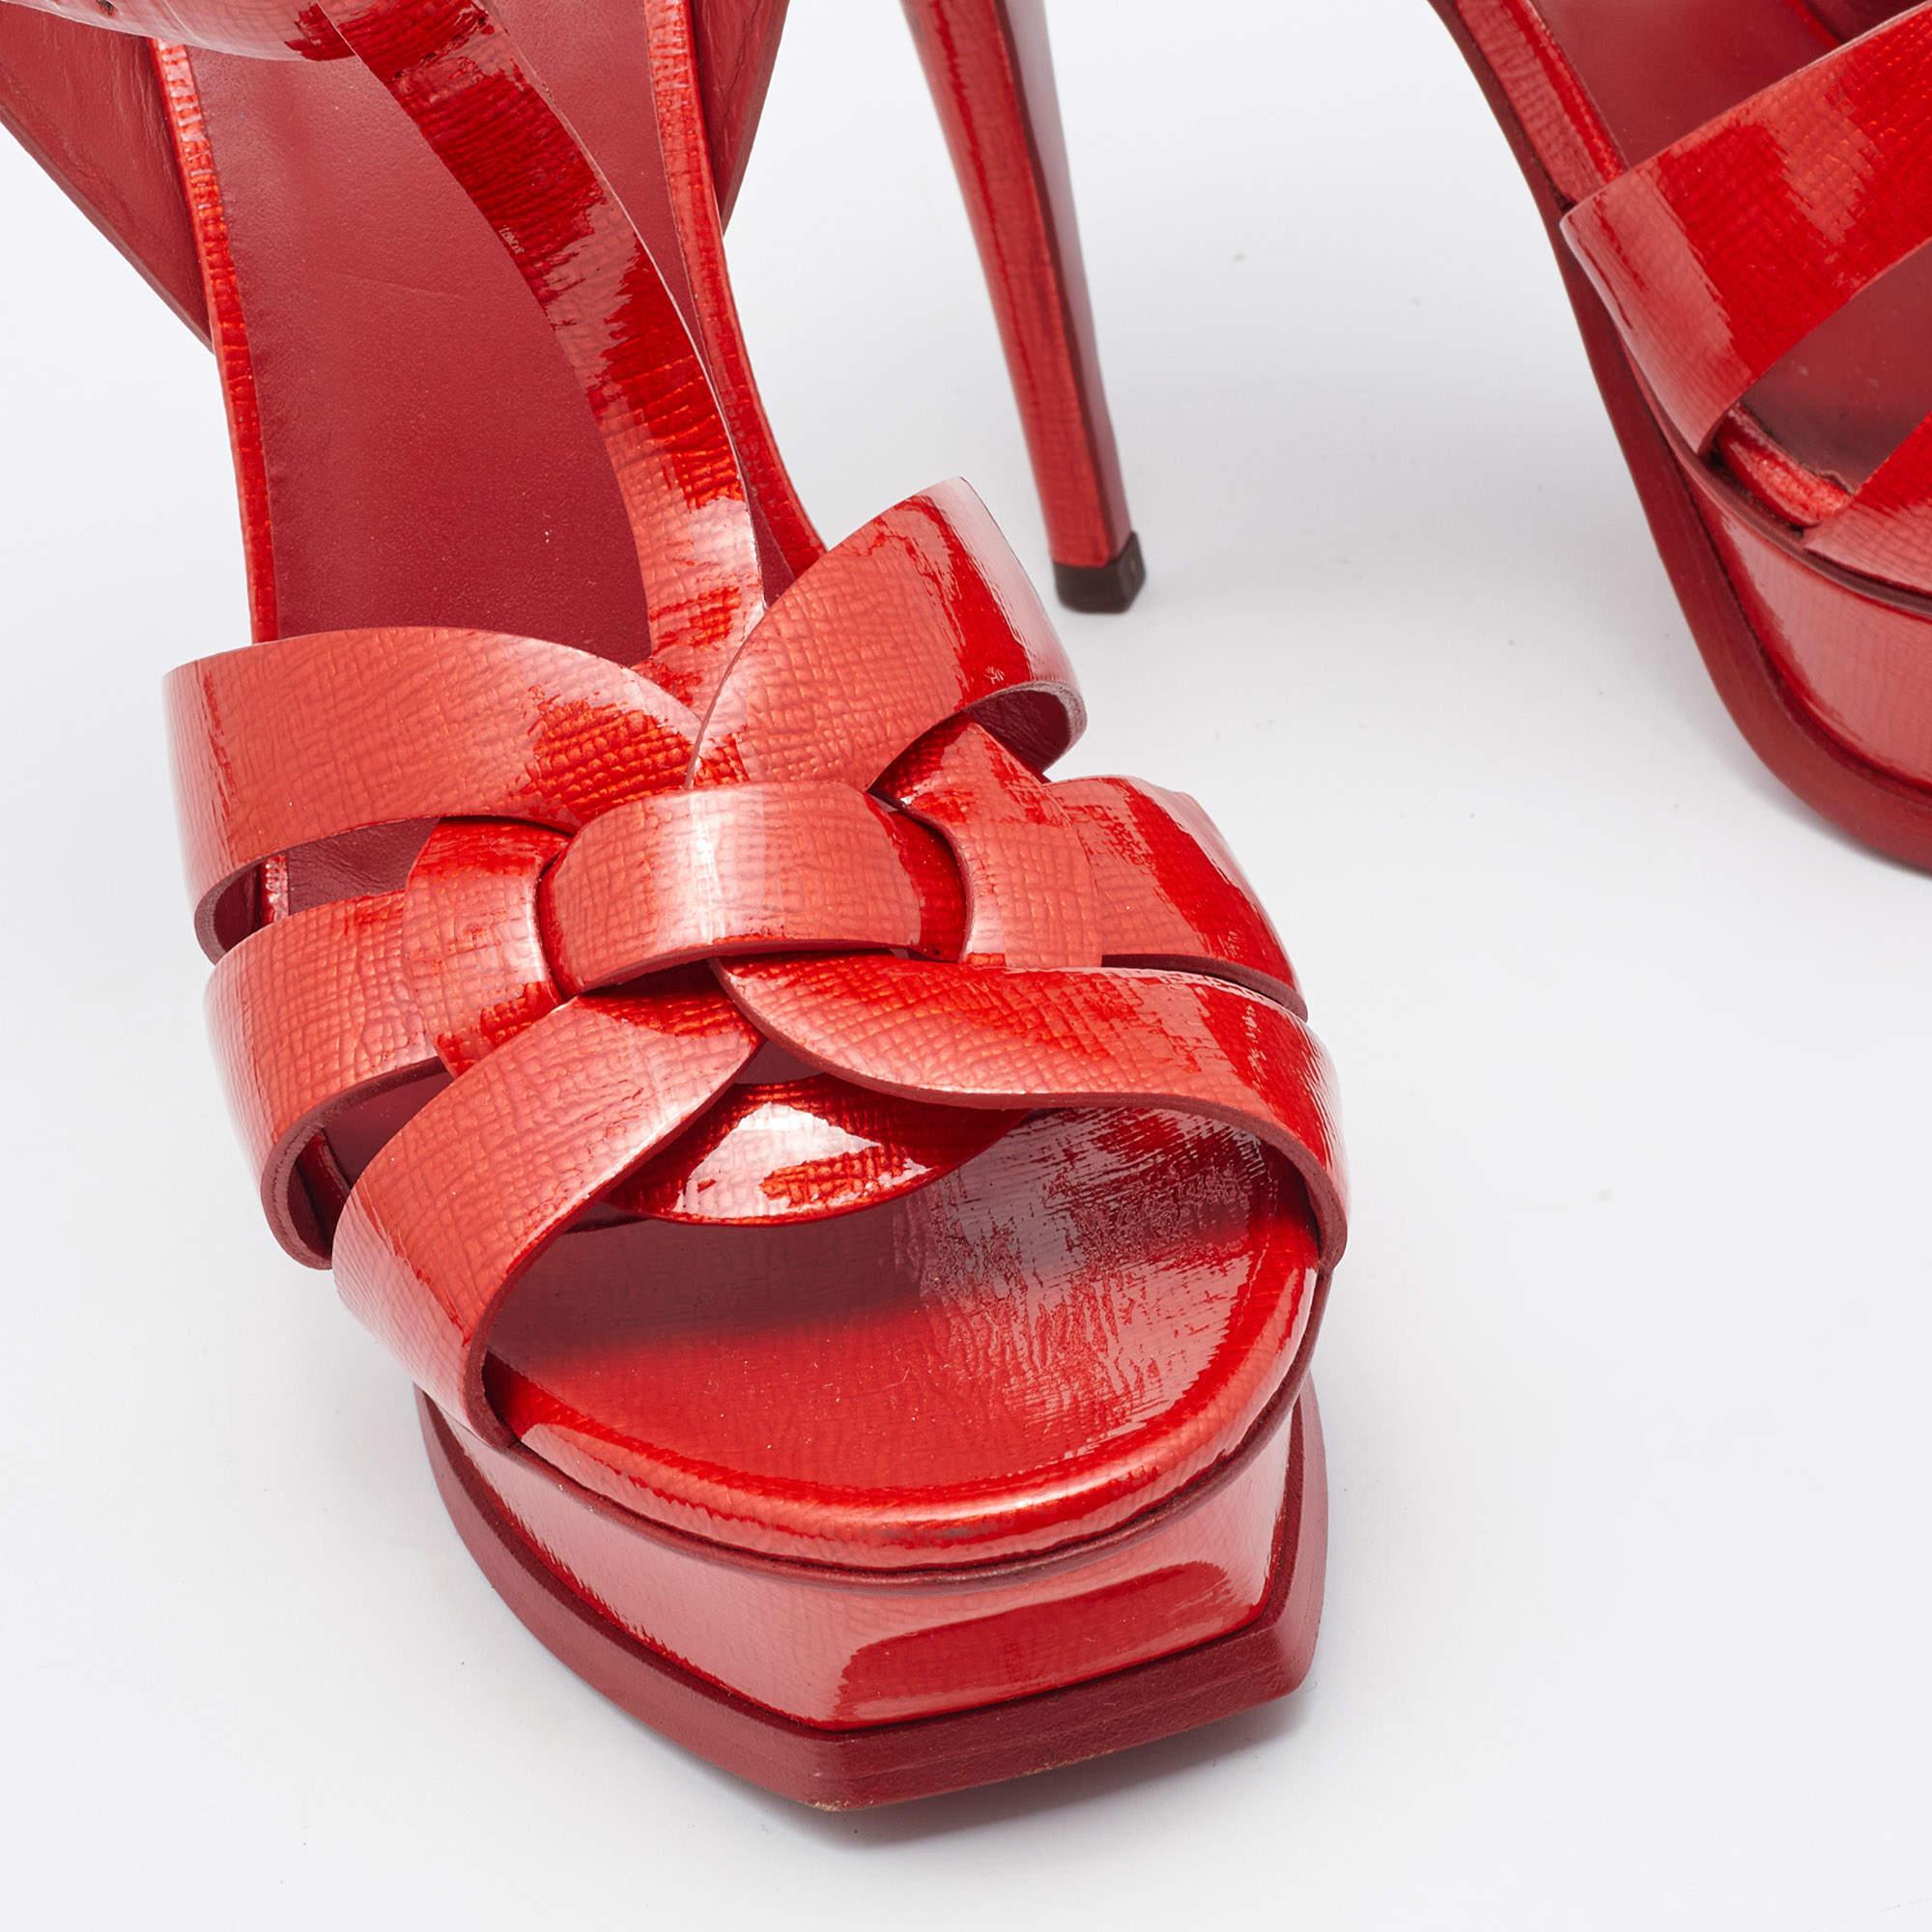 Women's Saint Laurent Red Patent Leather Tribute Ankle Strap Sandals Size 41